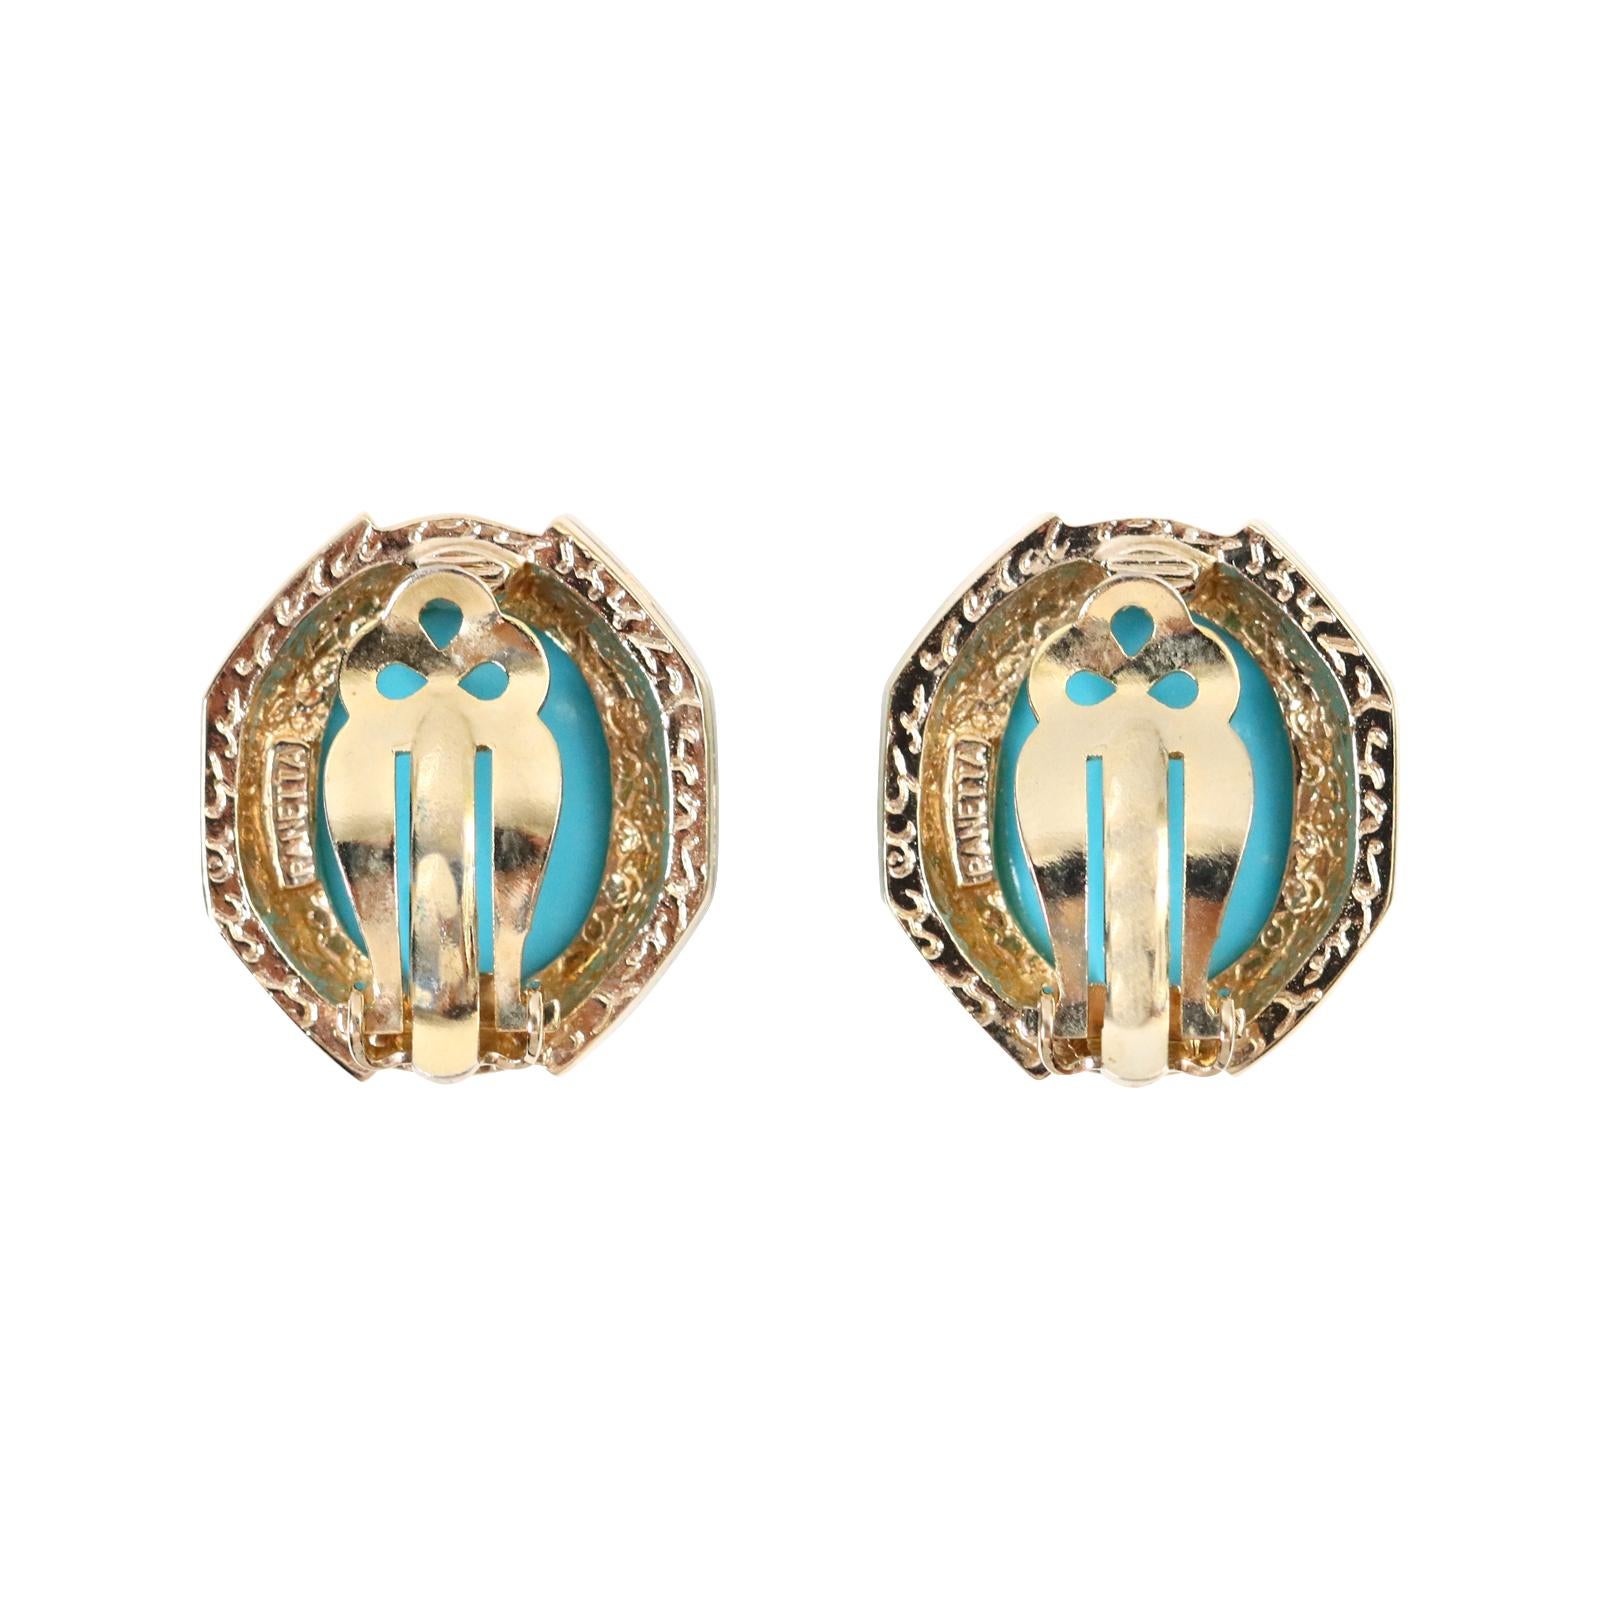 Vintage Panetta Gold Tone Diamante Faux Turquoise Earrings, Circa 1980s For Sale 1